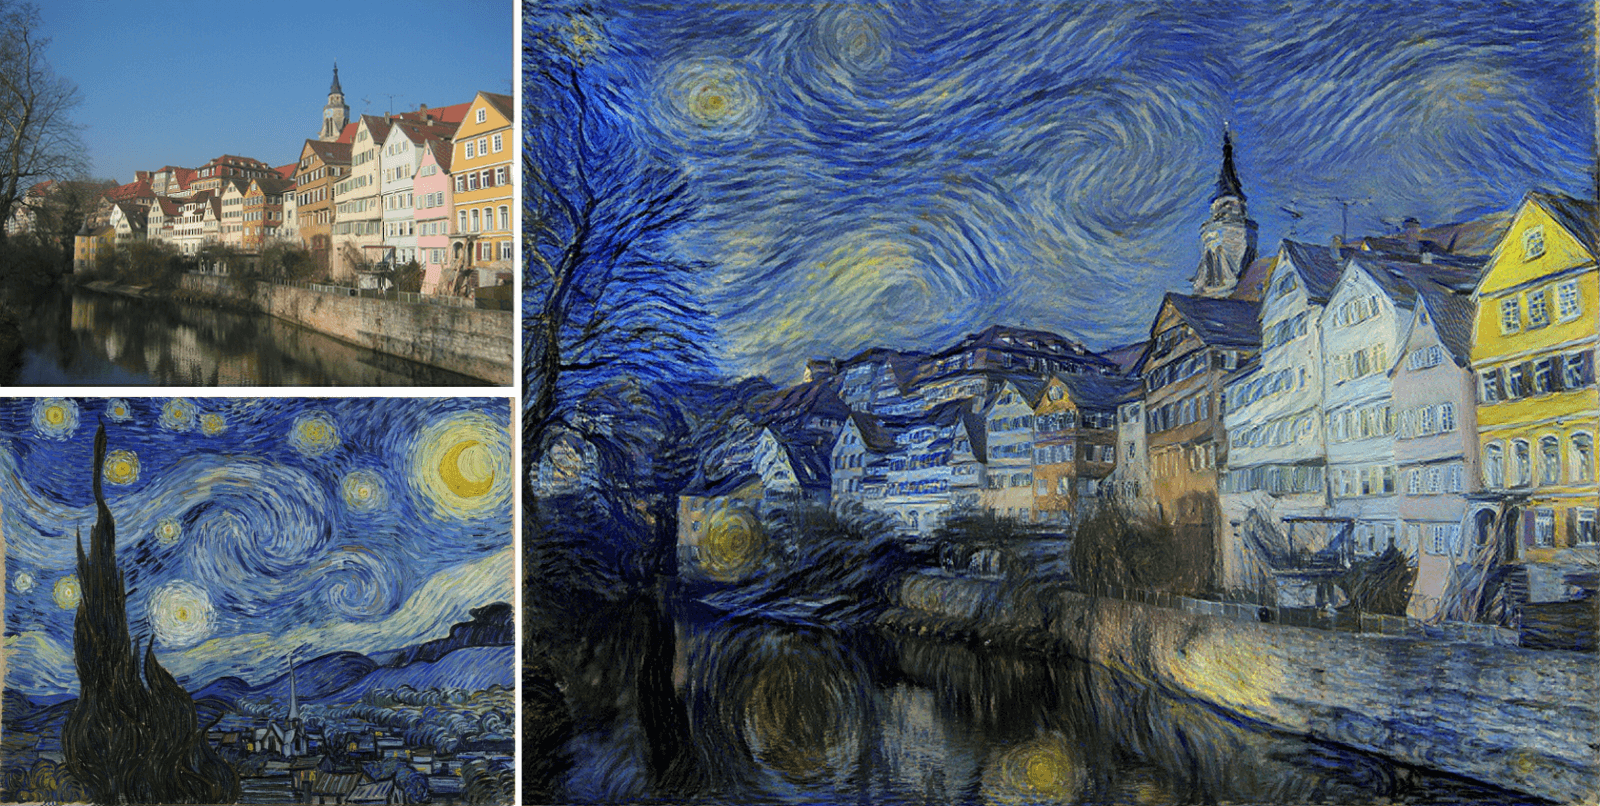  Figure 9.3 The content image, a photograph of the Neckarfront at Tübingen (upper left). The style image, van Gogh’s The Starry Night (lower left). The image on the right results from combining the style and content images to make The Neckarfront at Tübingen according to van Gogh, as van Gogh might have painted it. 